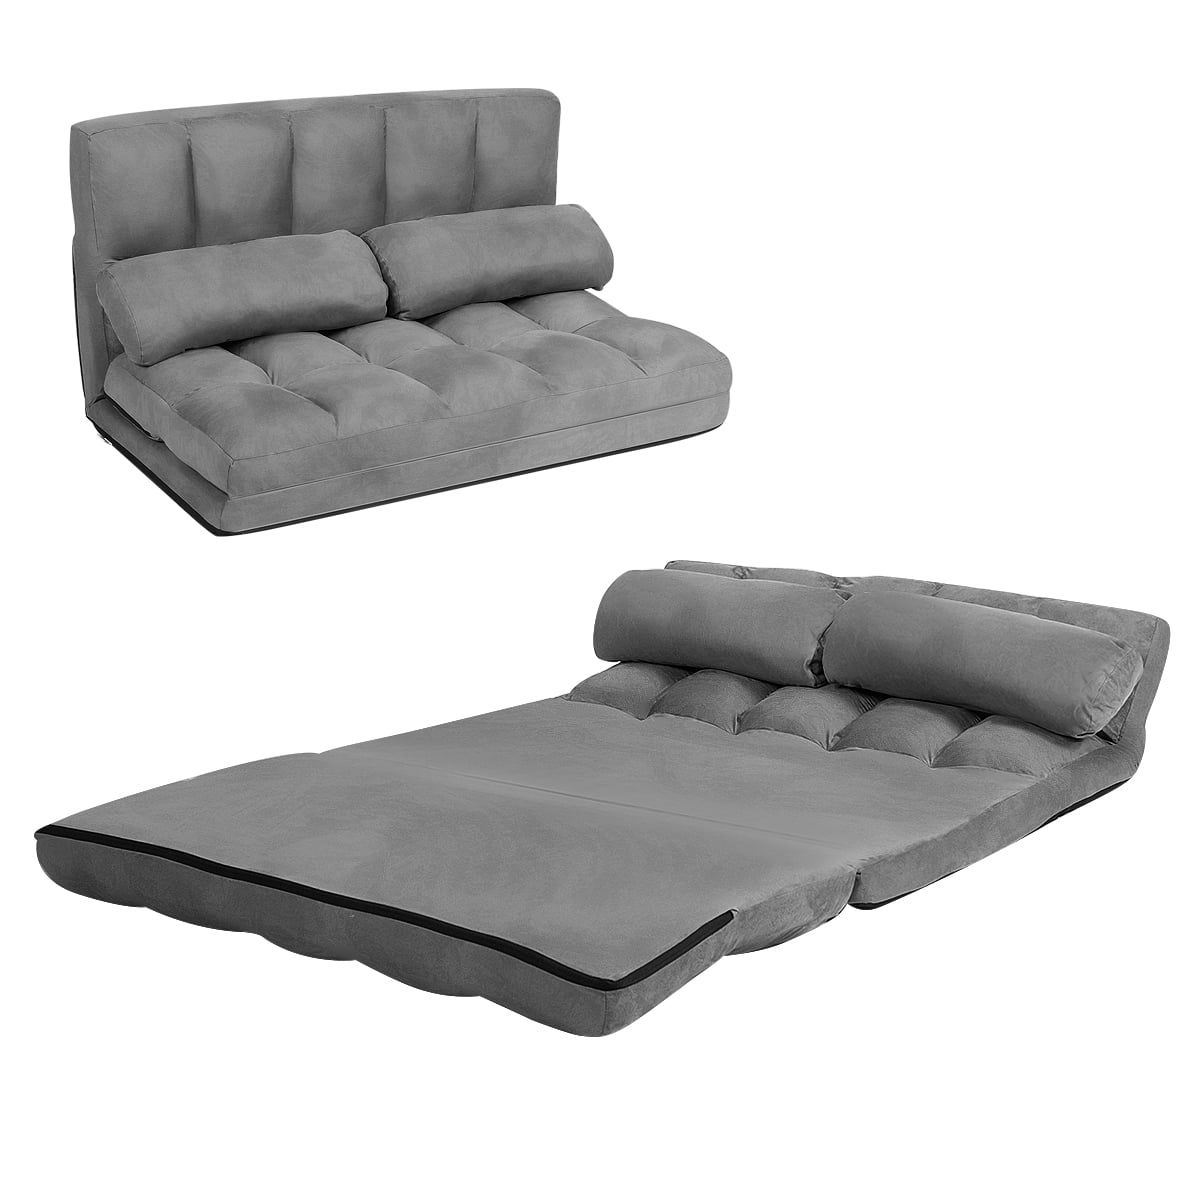 Topbuy Adjustable Floor Sofa Foldable Lazy Sofa Bed With 2 Pillows Grey Intended For 2 In 1 Foldable Sofas (Gallery 11 of 20)